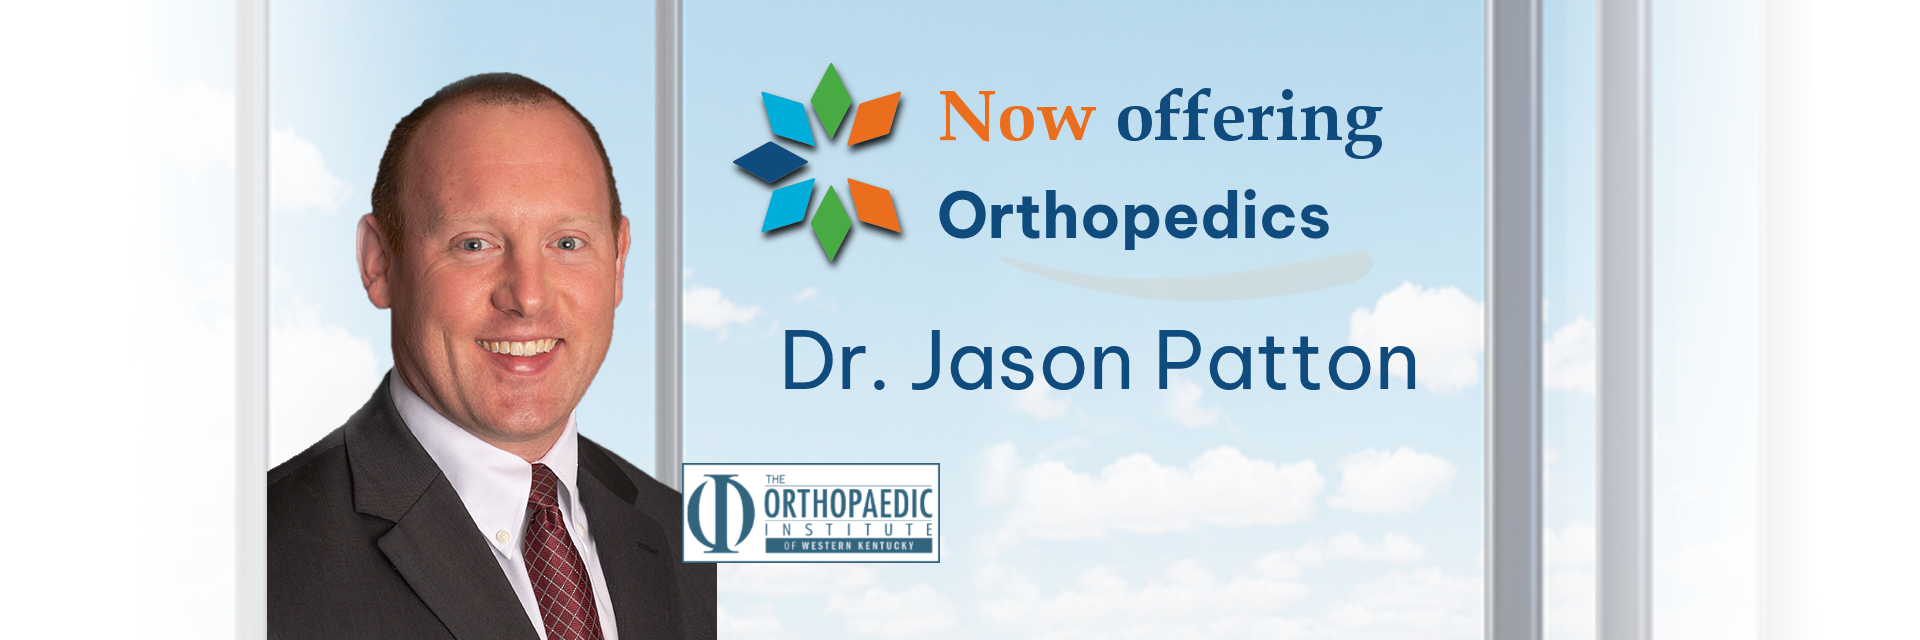 Banner picture of Dr. Jason Patton. Banner says:

Now offering Orthopedics
Dr. Jason Patton

THE ORTHOPAEDIC INSTITUTE OF WESTERN KENTUCKY